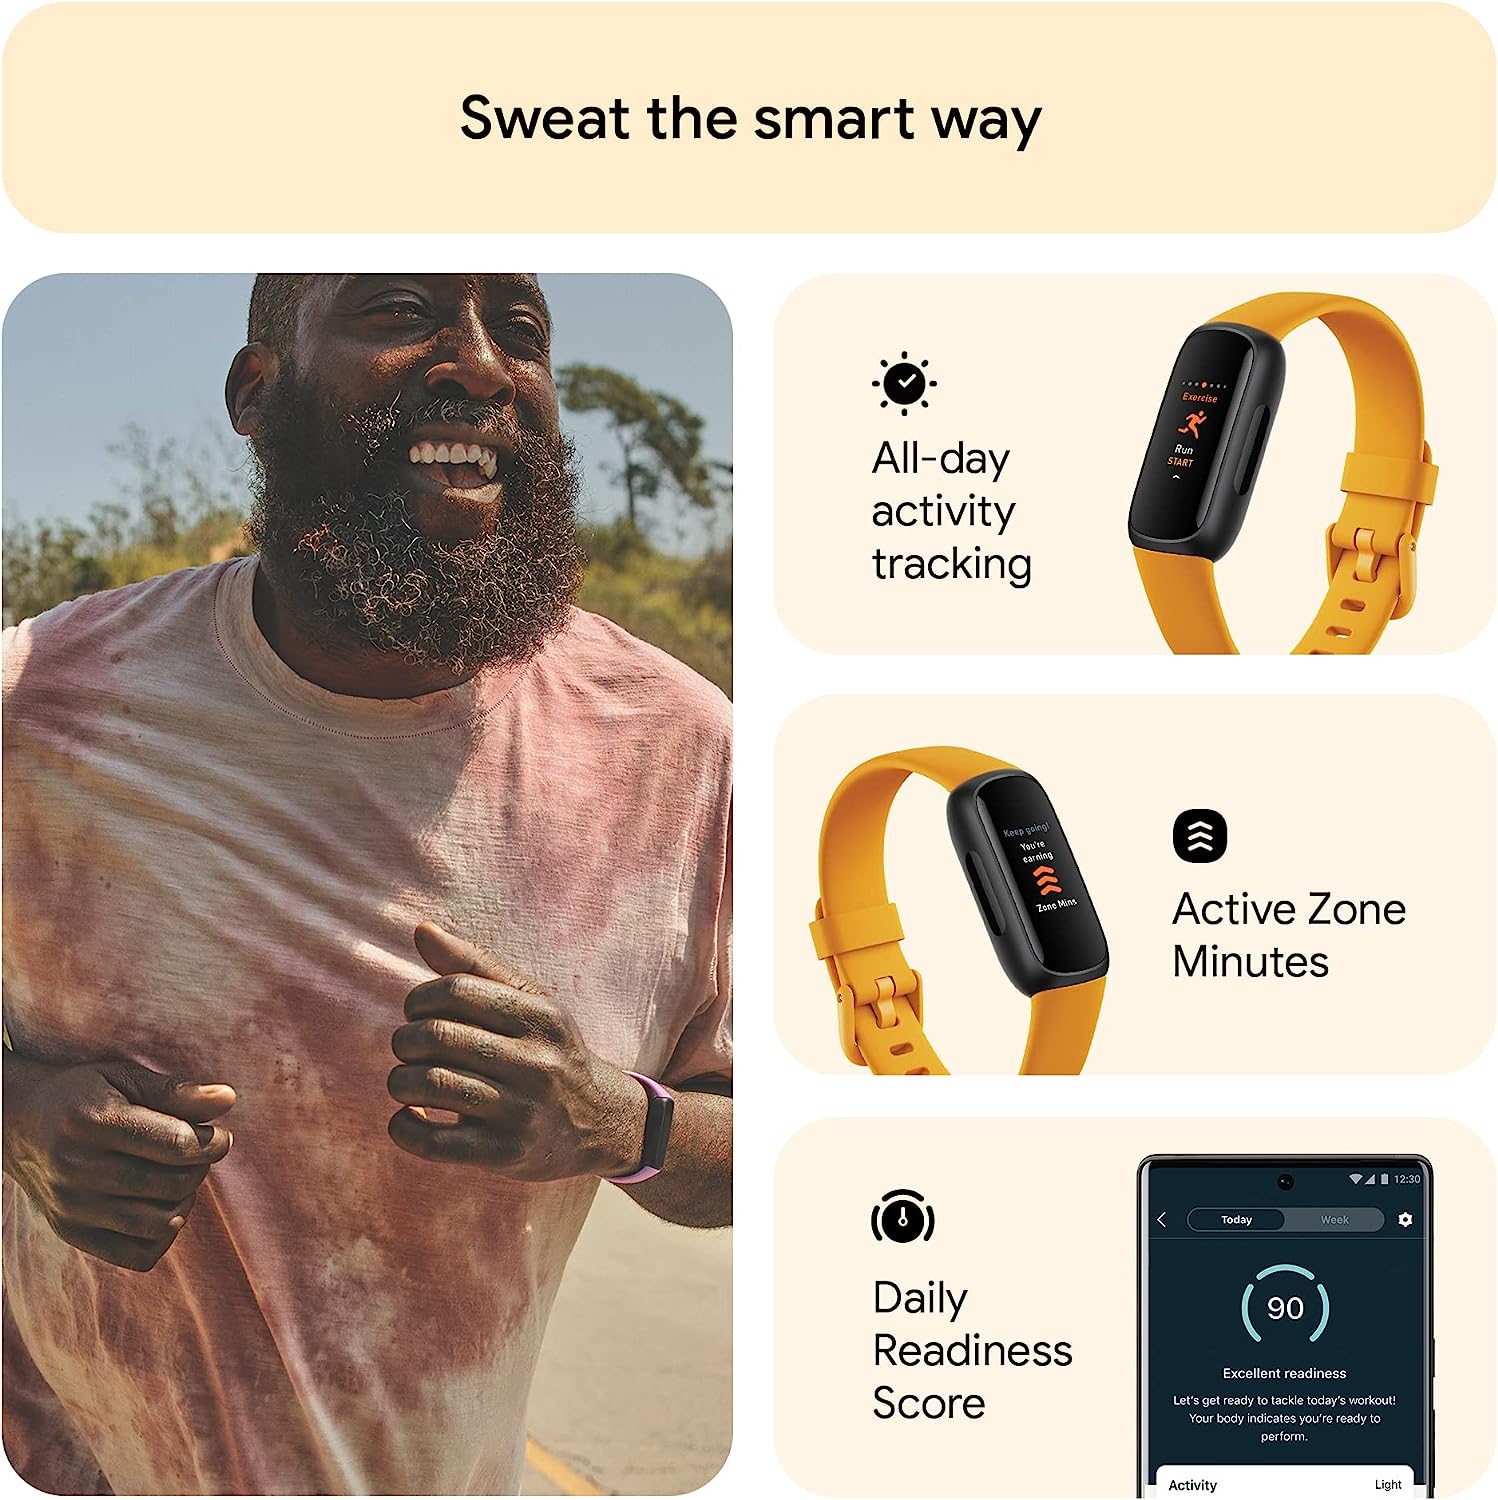 Fitbit Inspire 3 Health & Fitness Tracker with Stress Management, Workout Intensity, Sleep Tracking, 24/7 Heart Rate and more, Midnight Zen/Black One Size (S & L Bands Included)